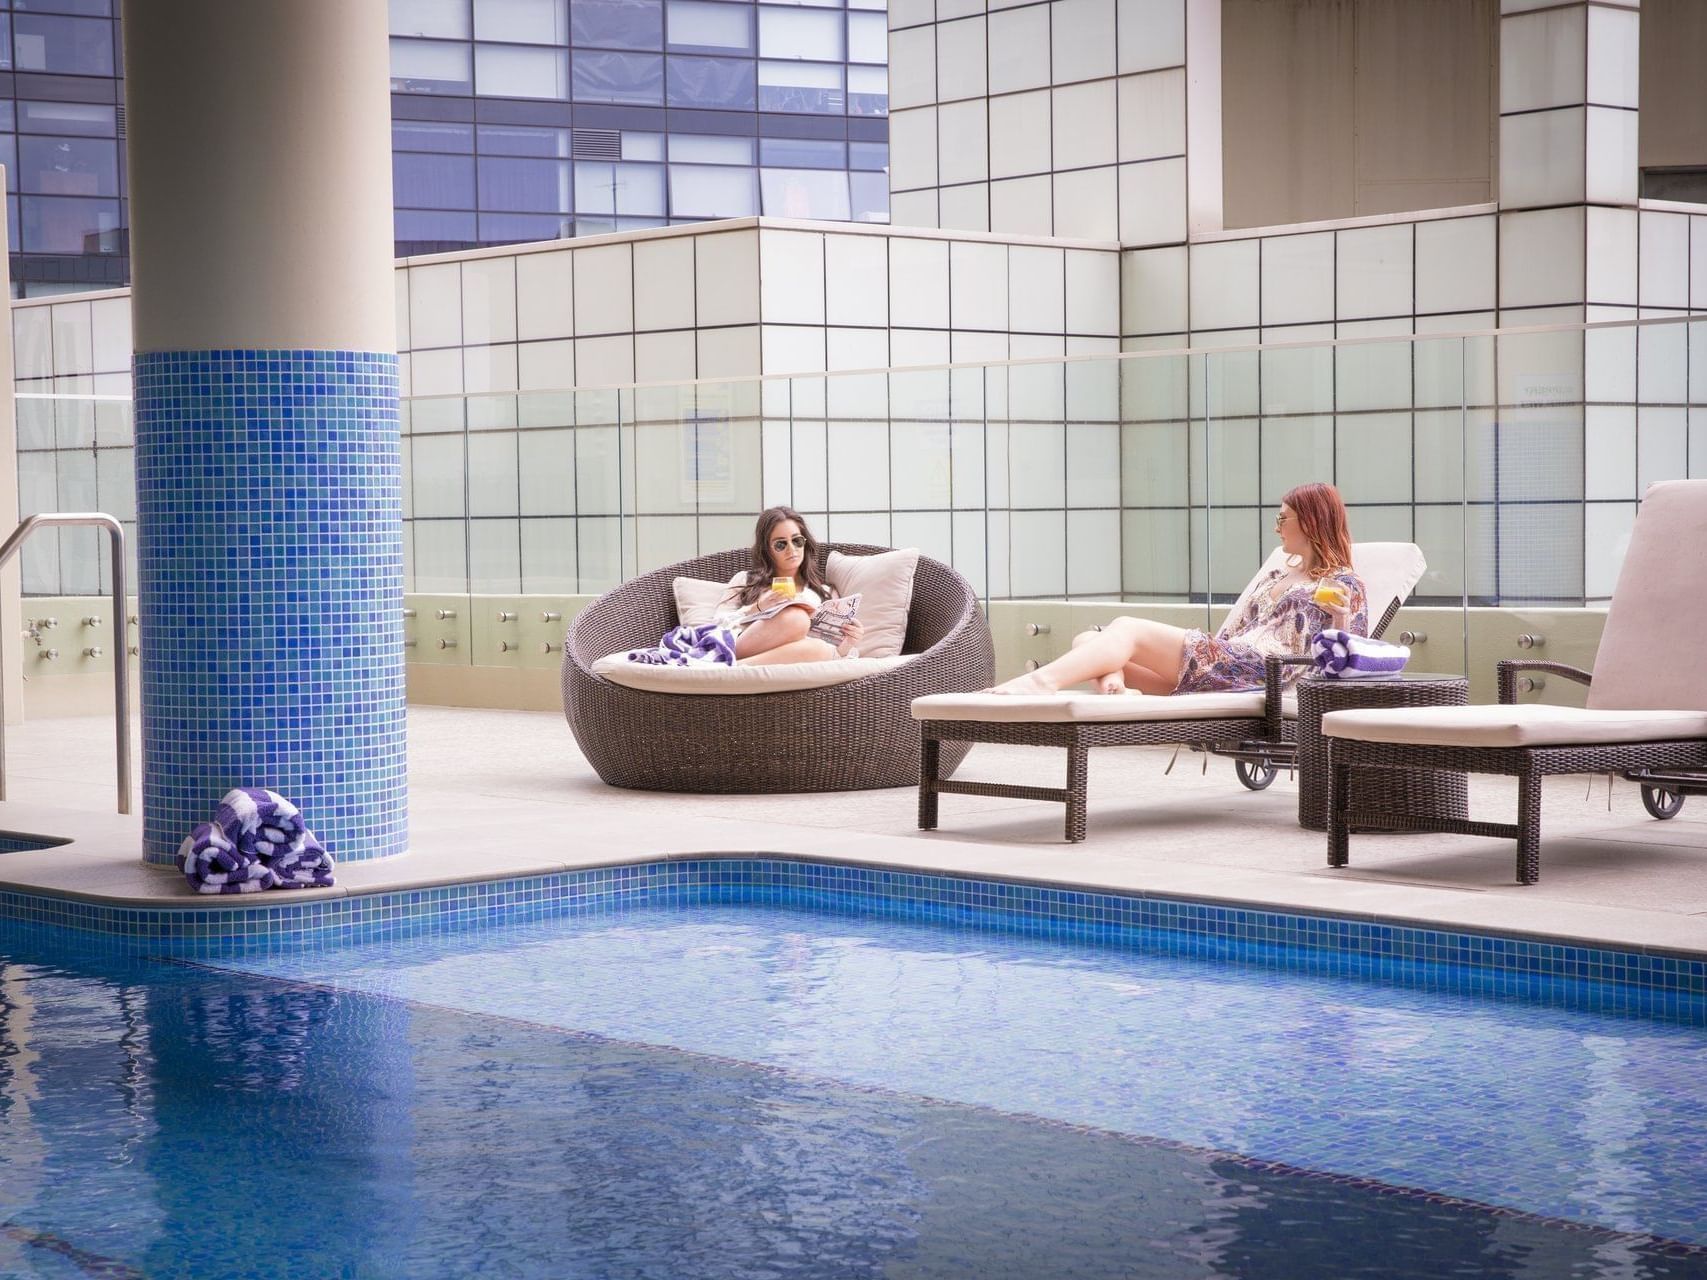 Ladies sitting near the pool at the Sebel Residence Chatswood